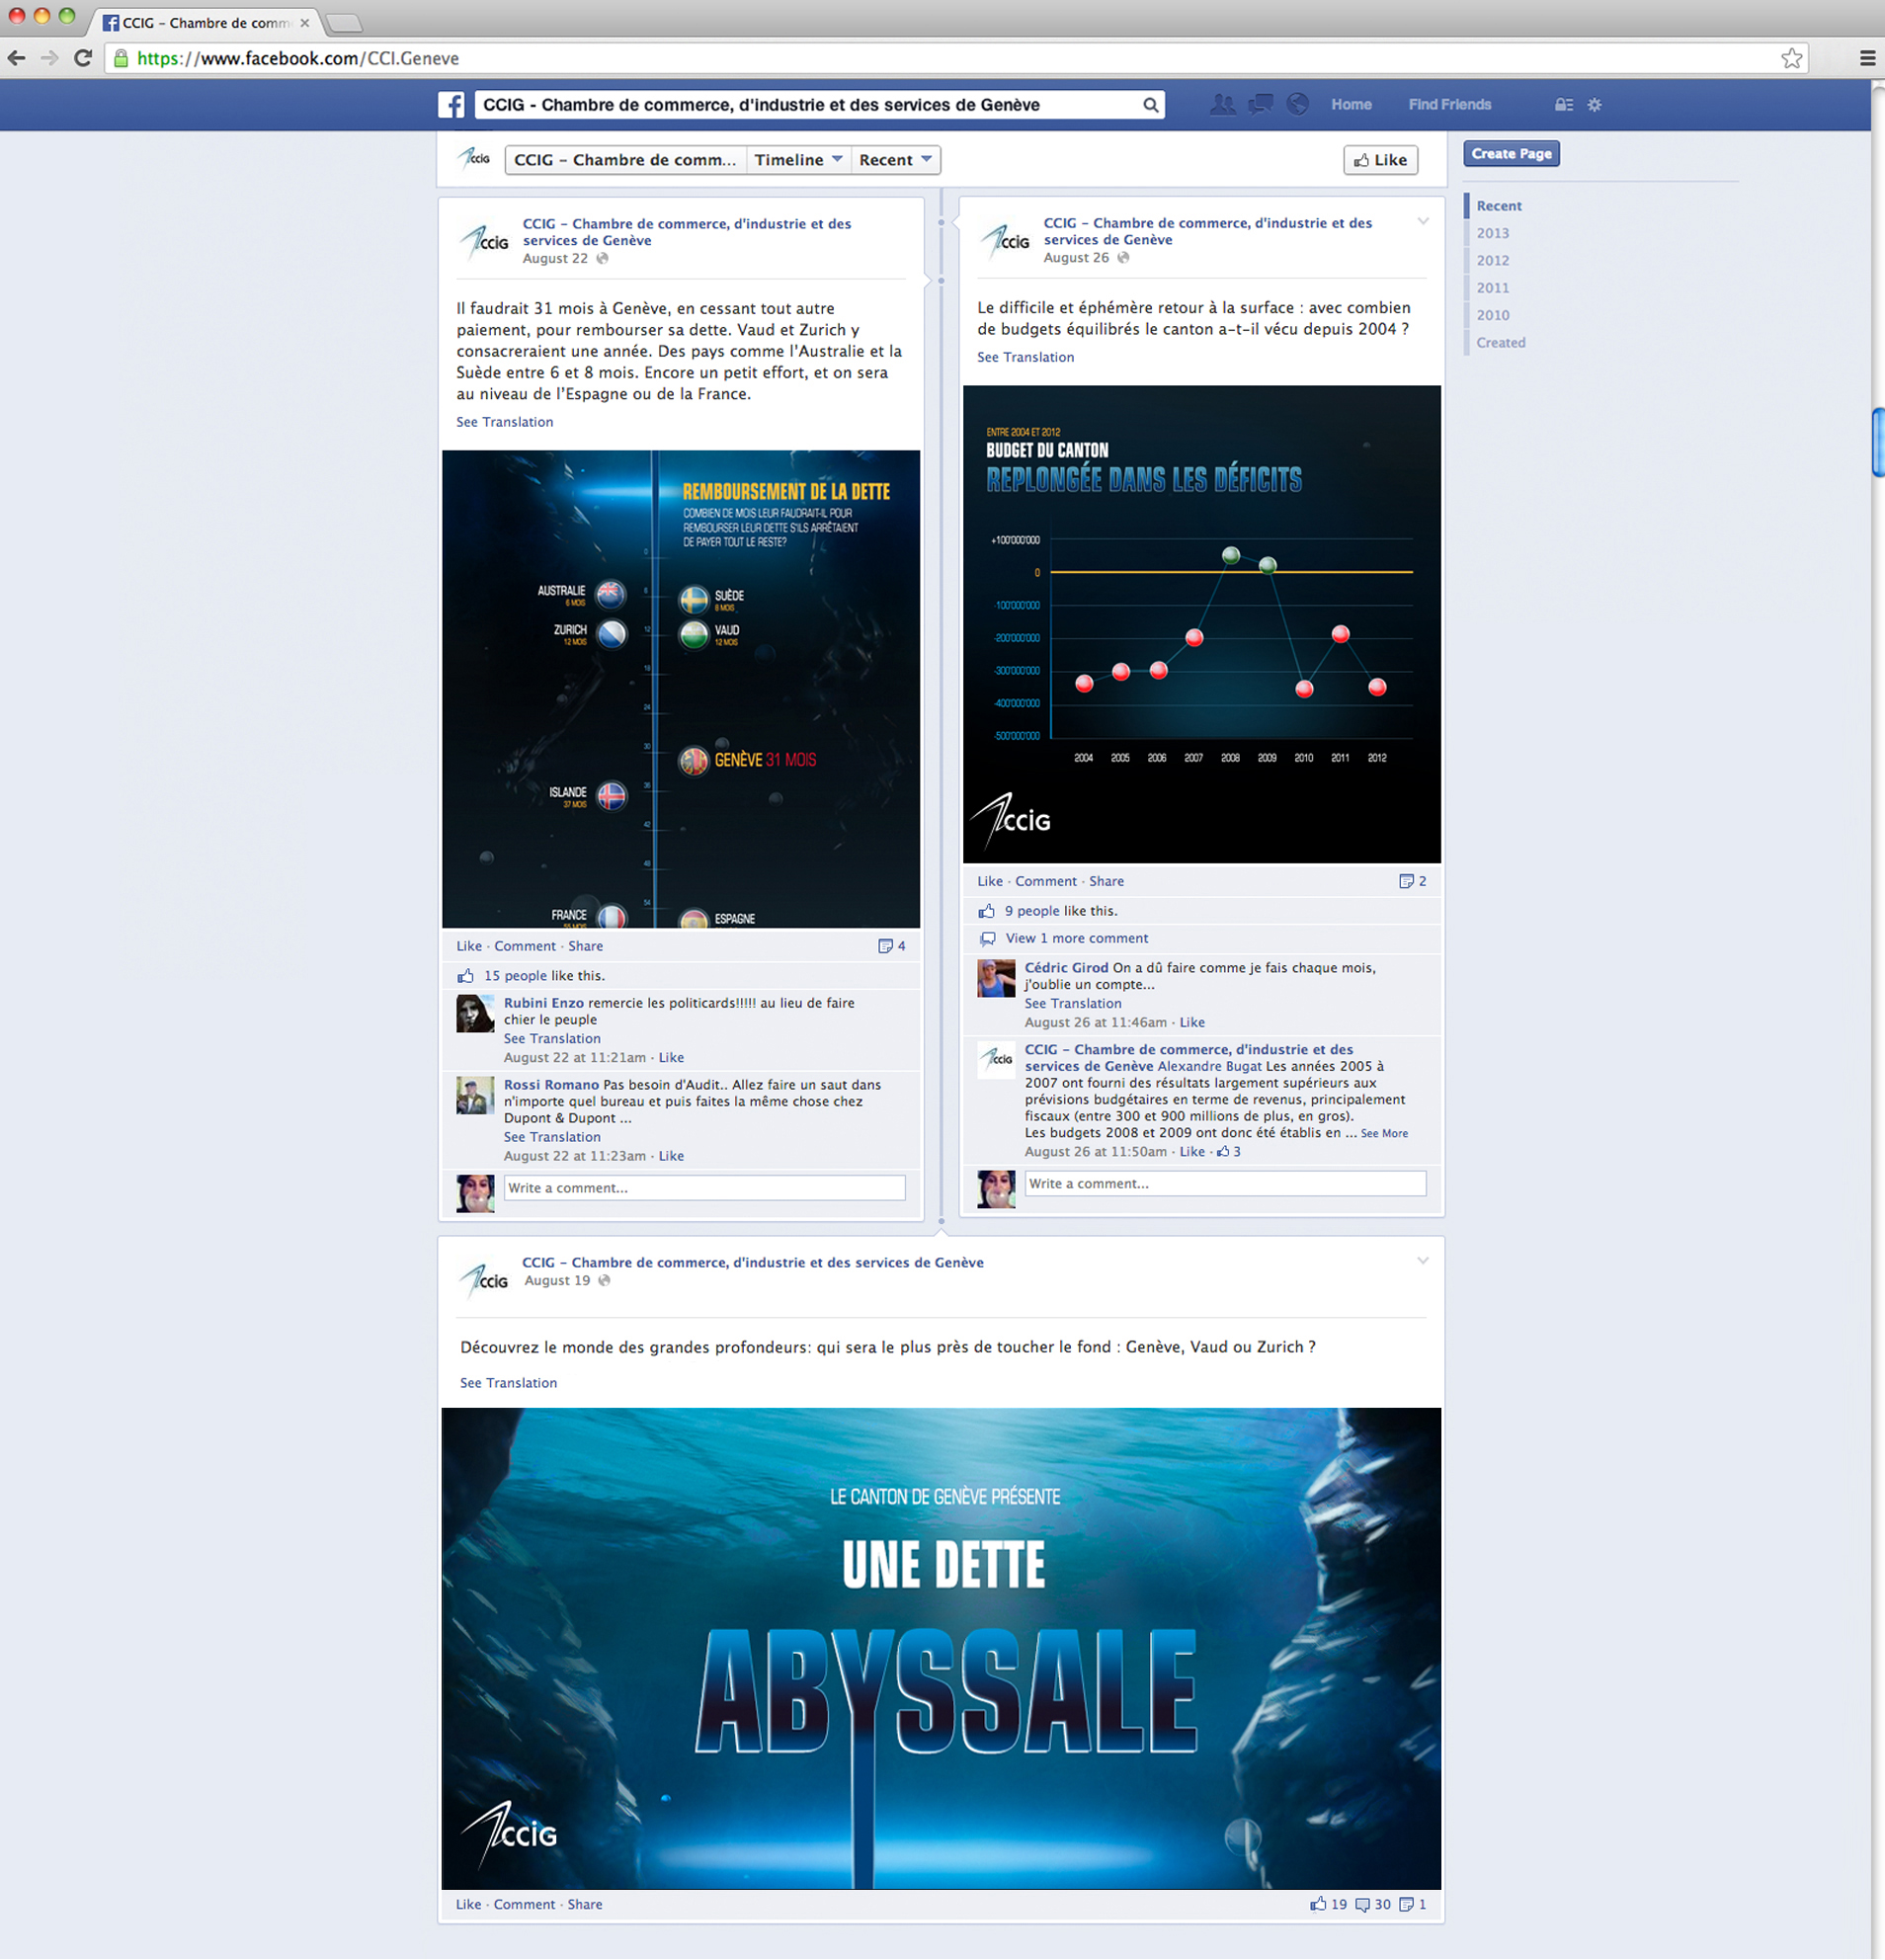 Display of the Abyssal debt on Facebook